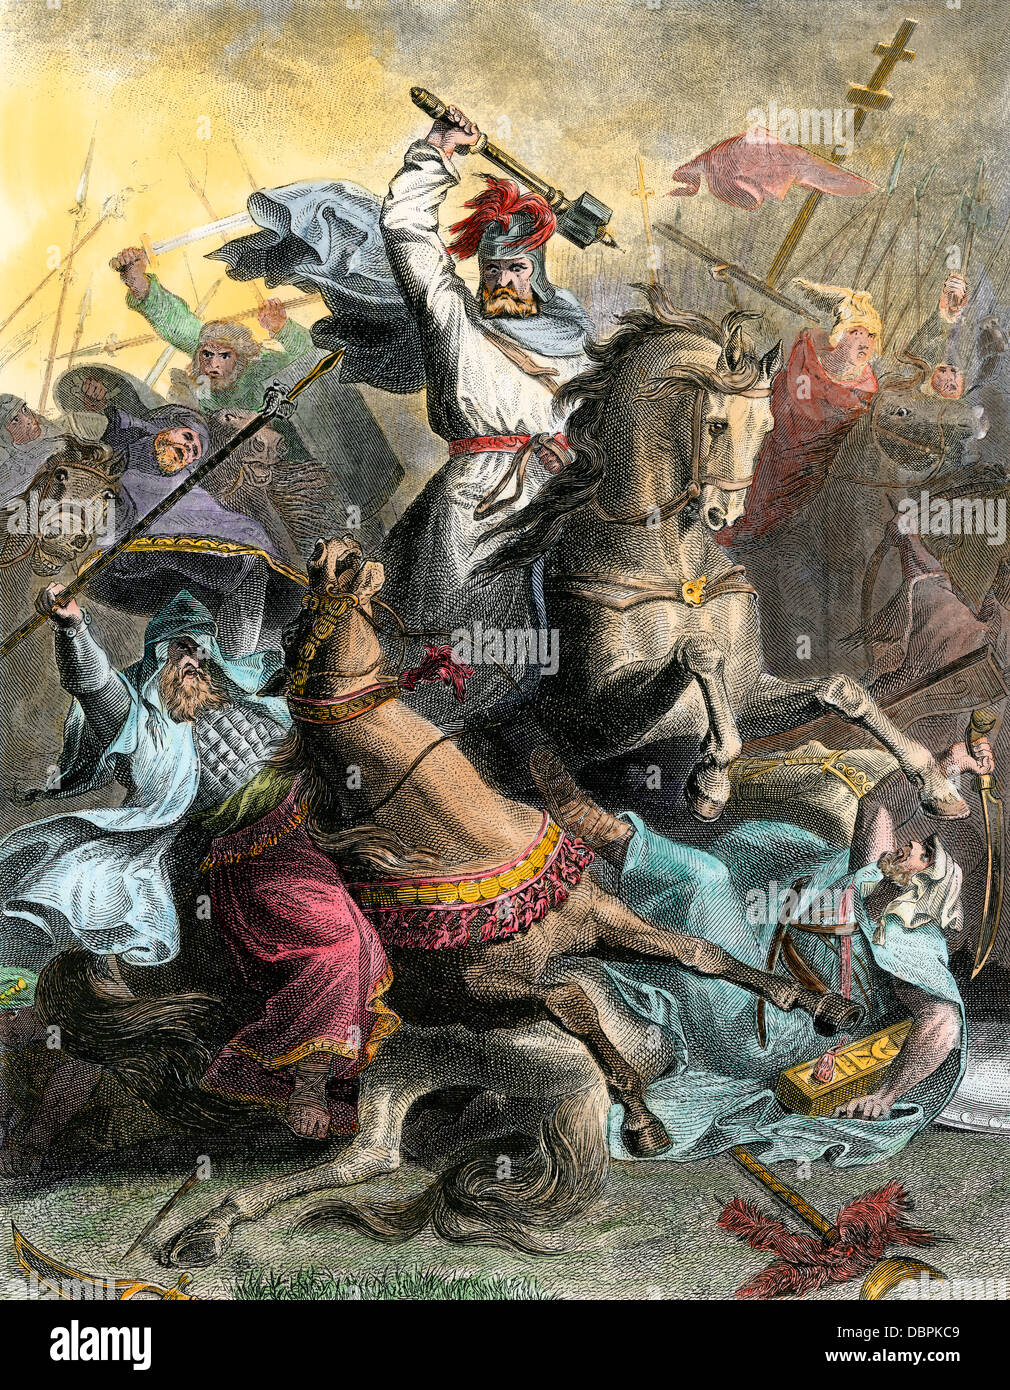 Charles Martel leading the Franks against Arab invaders at Tours, France, 732 AD. Hand-colored engraving Stock Photo